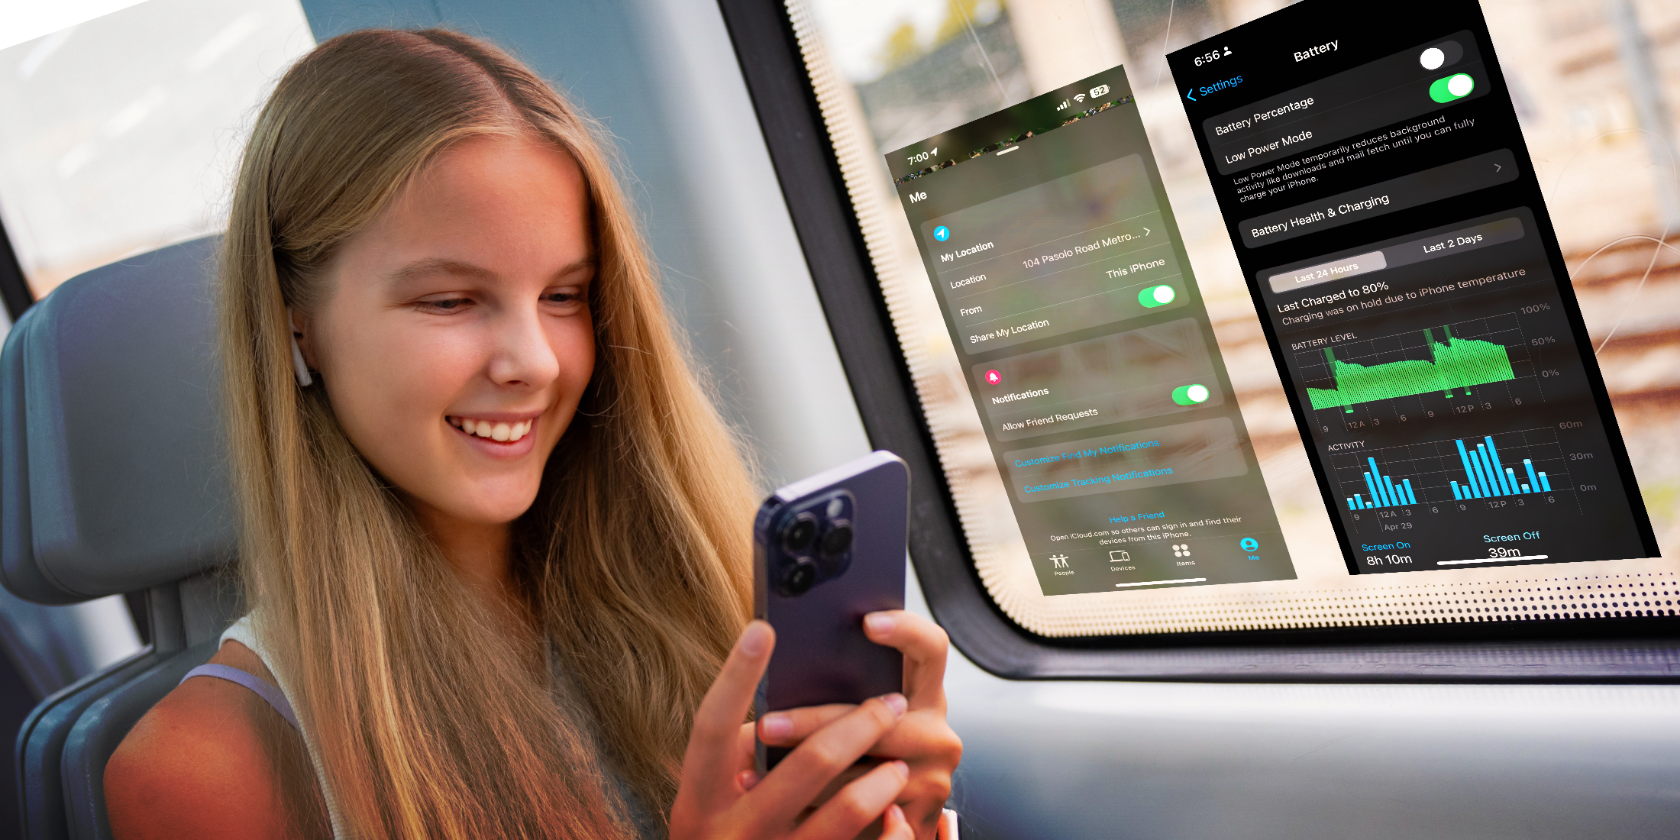 A smiling young woman with long blonde hair is holding a navy blue smartphone, her attention captured by the screen